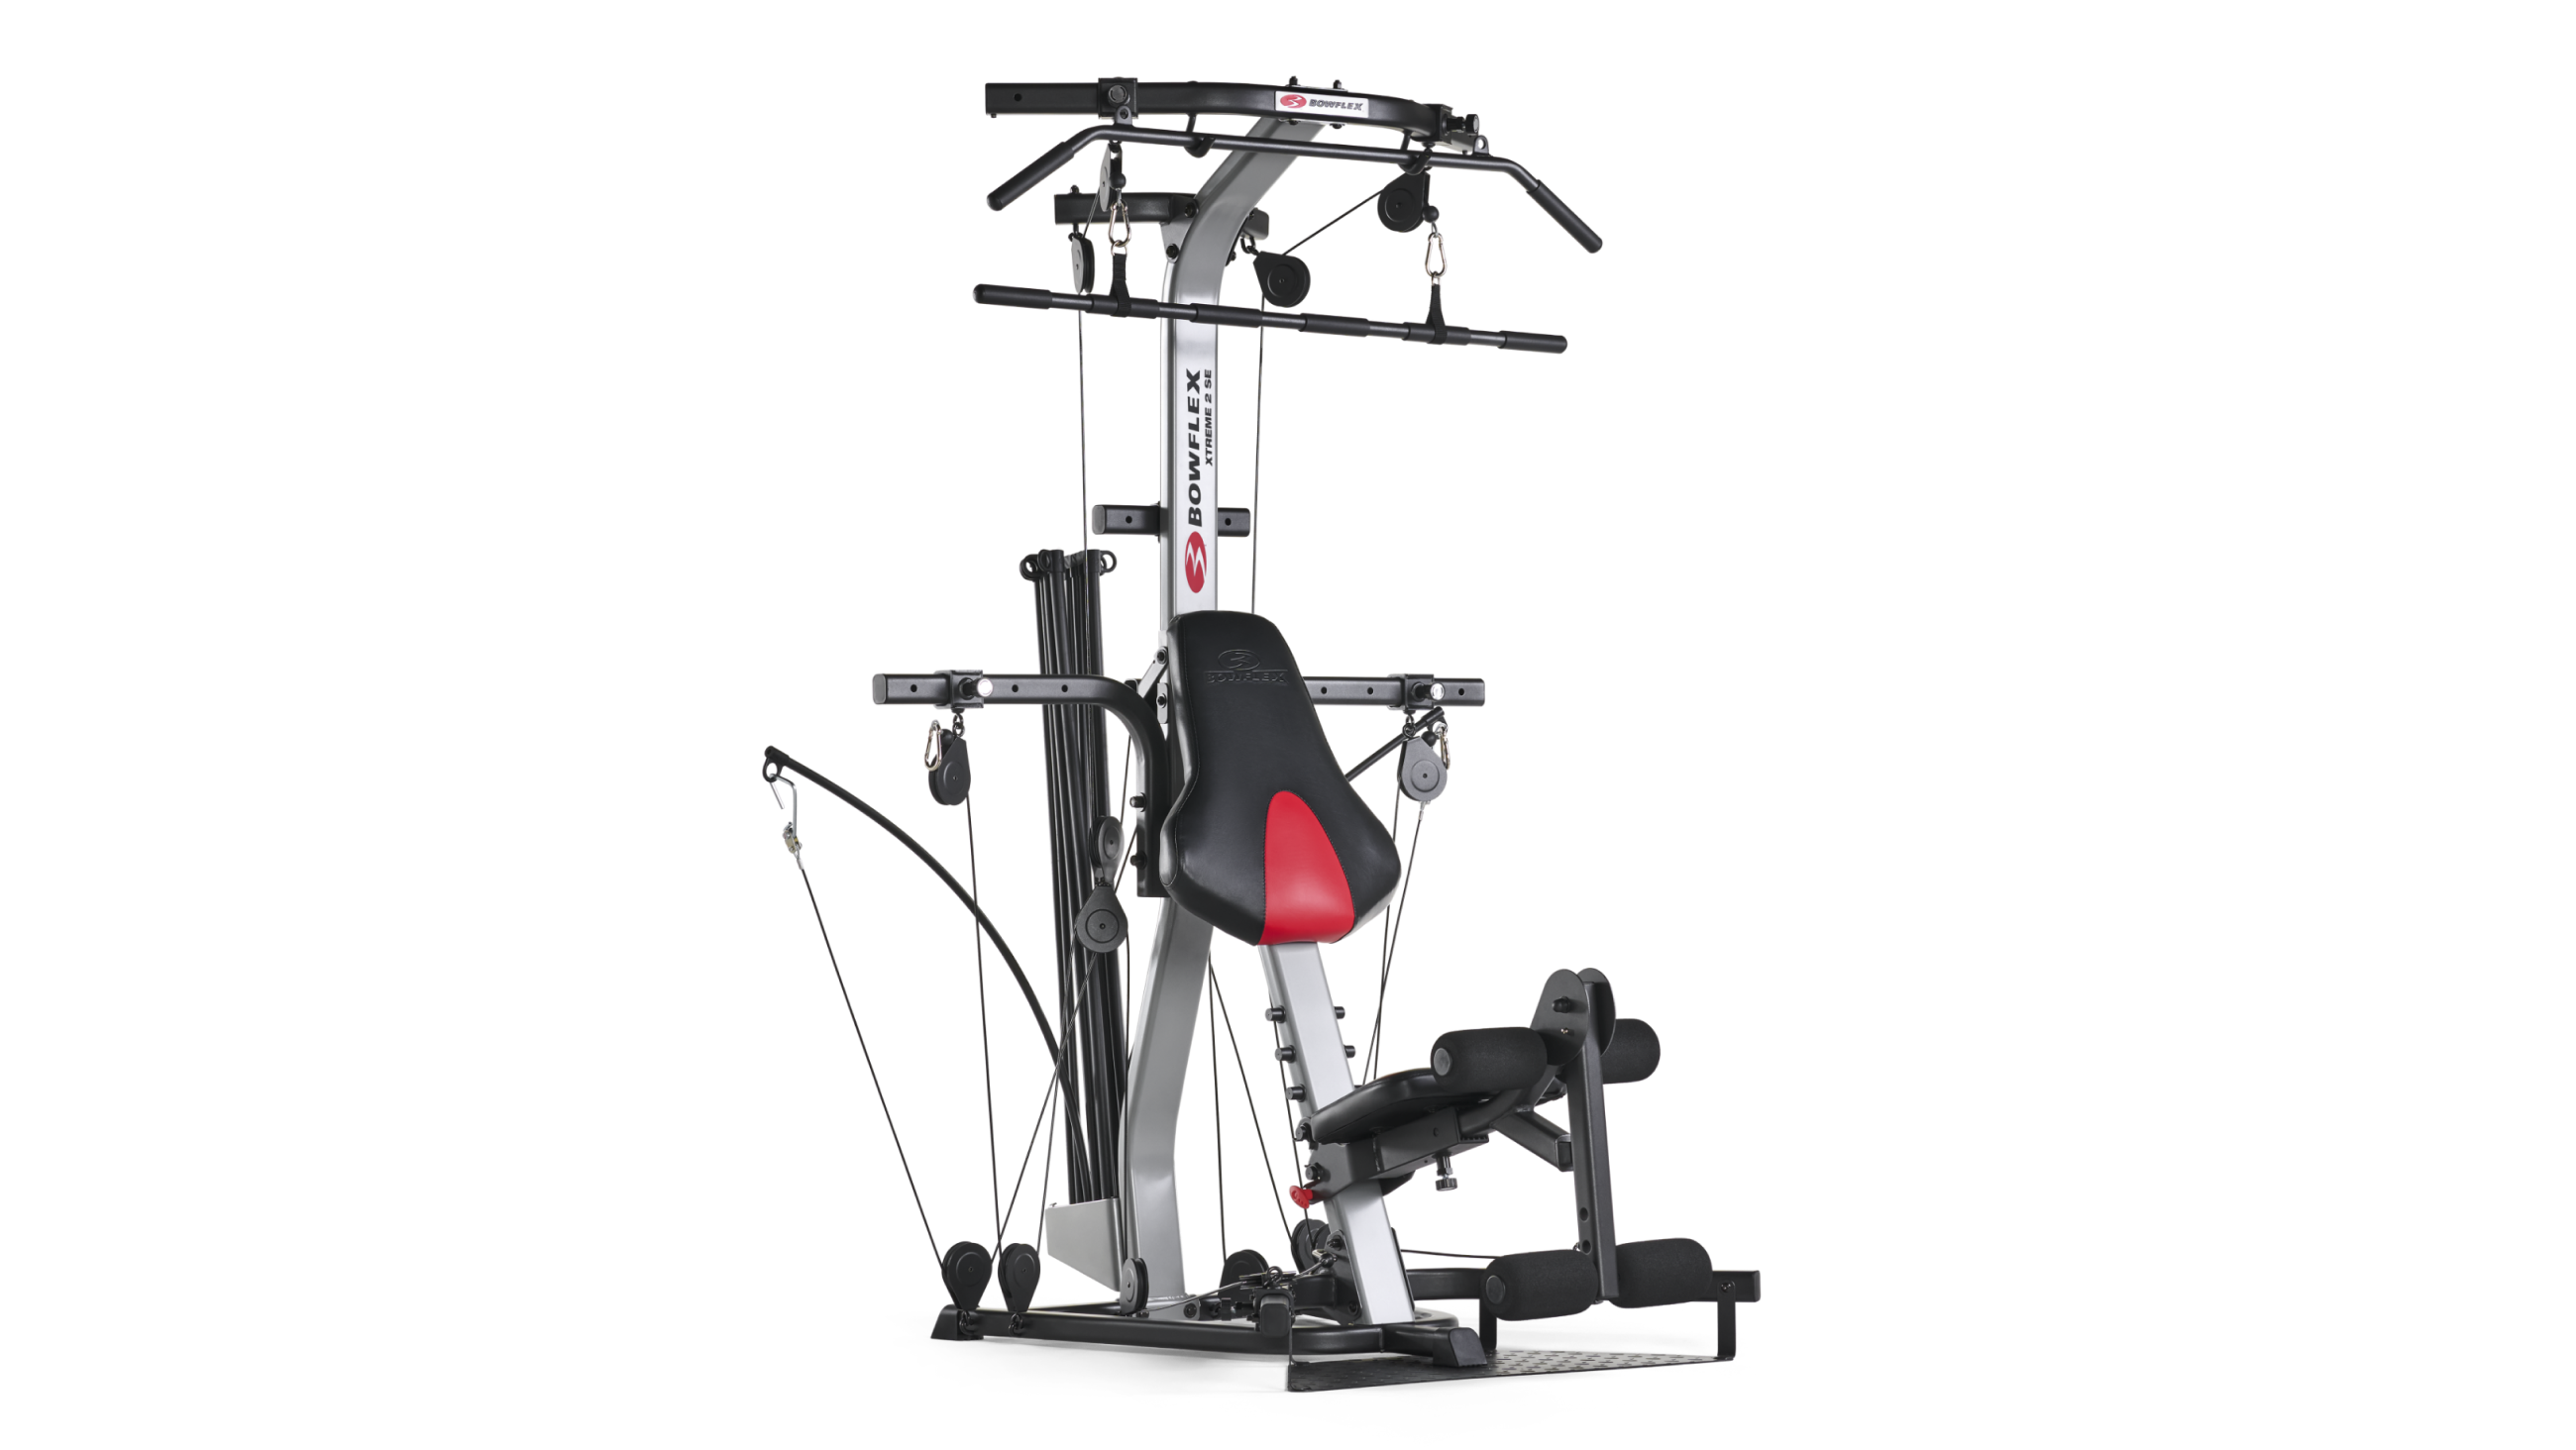 Bowflex home gyms: Learn more here